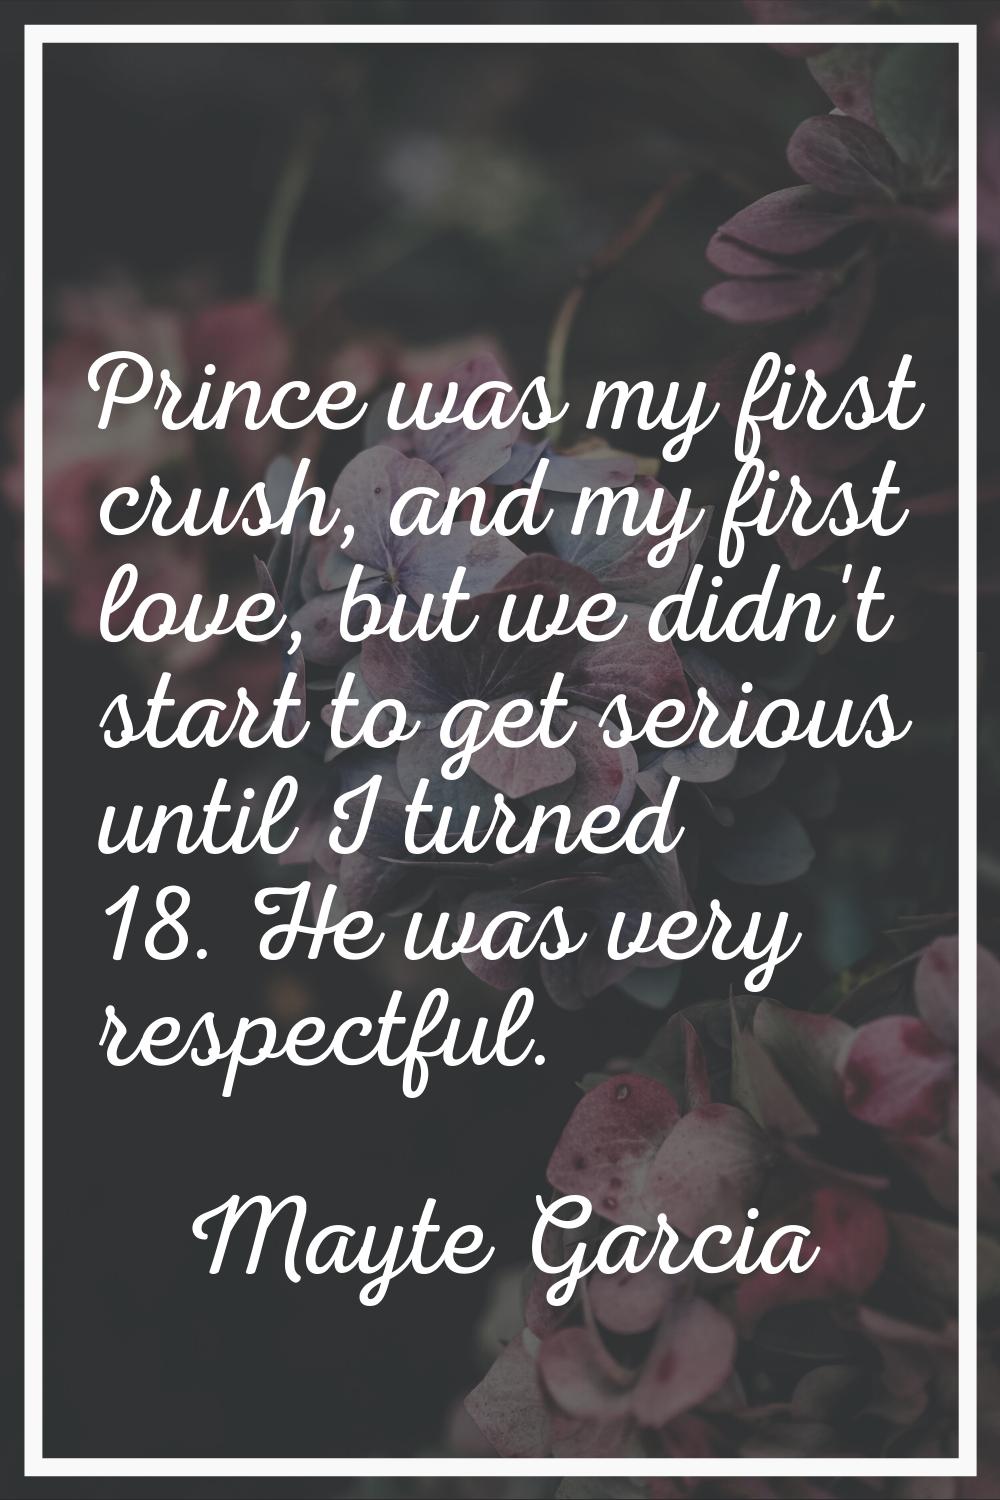 Prince was my first crush, and my first love, but we didn't start to get serious until I turned 18.